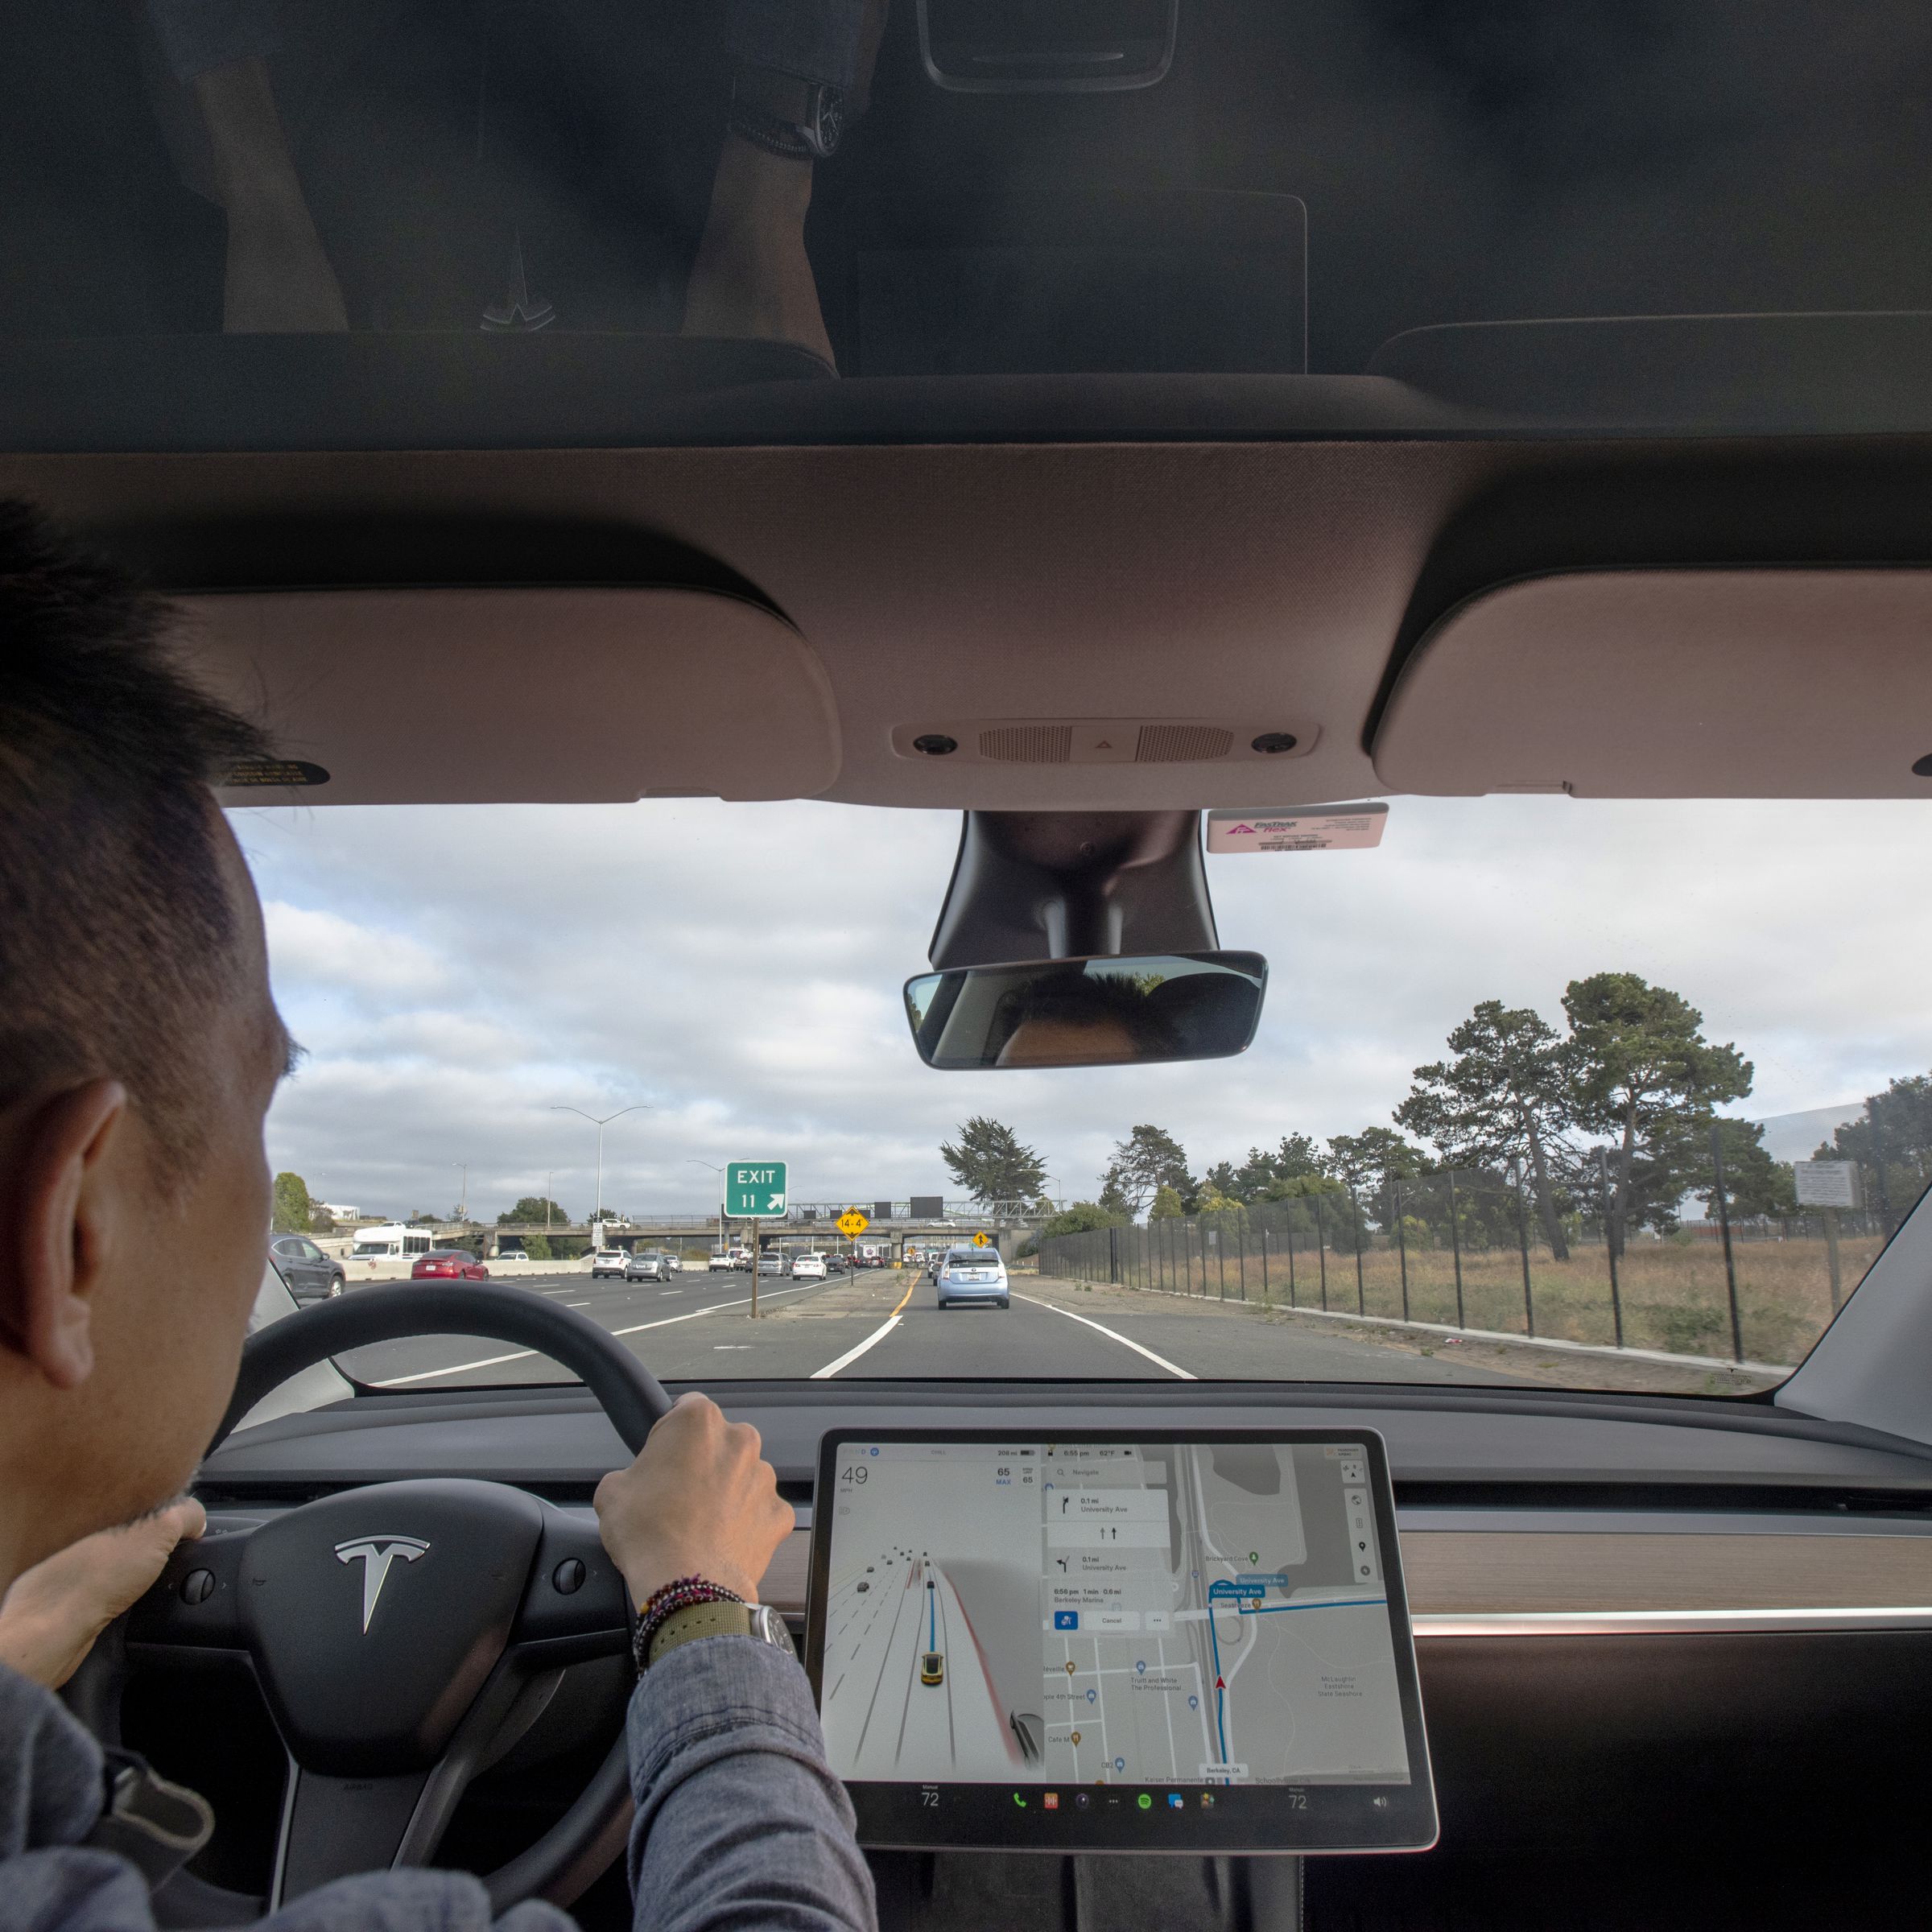 View of FSD system in action with Tesla dashboard display